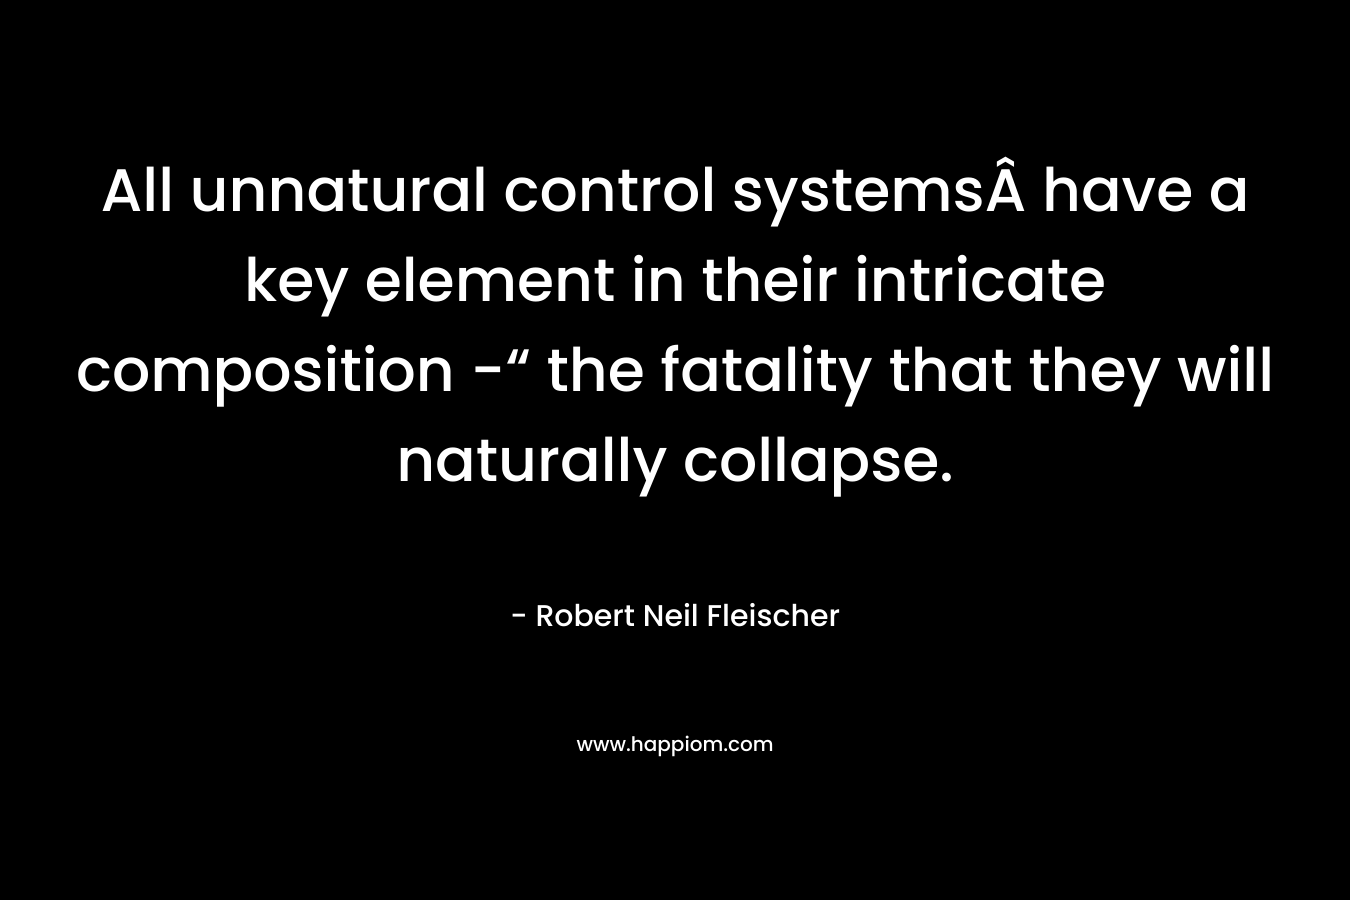 All unnatural control systemsÂ have a key element in their intricate composition -“ the fatality that they will naturally collapse. – Robert Neil Fleischer